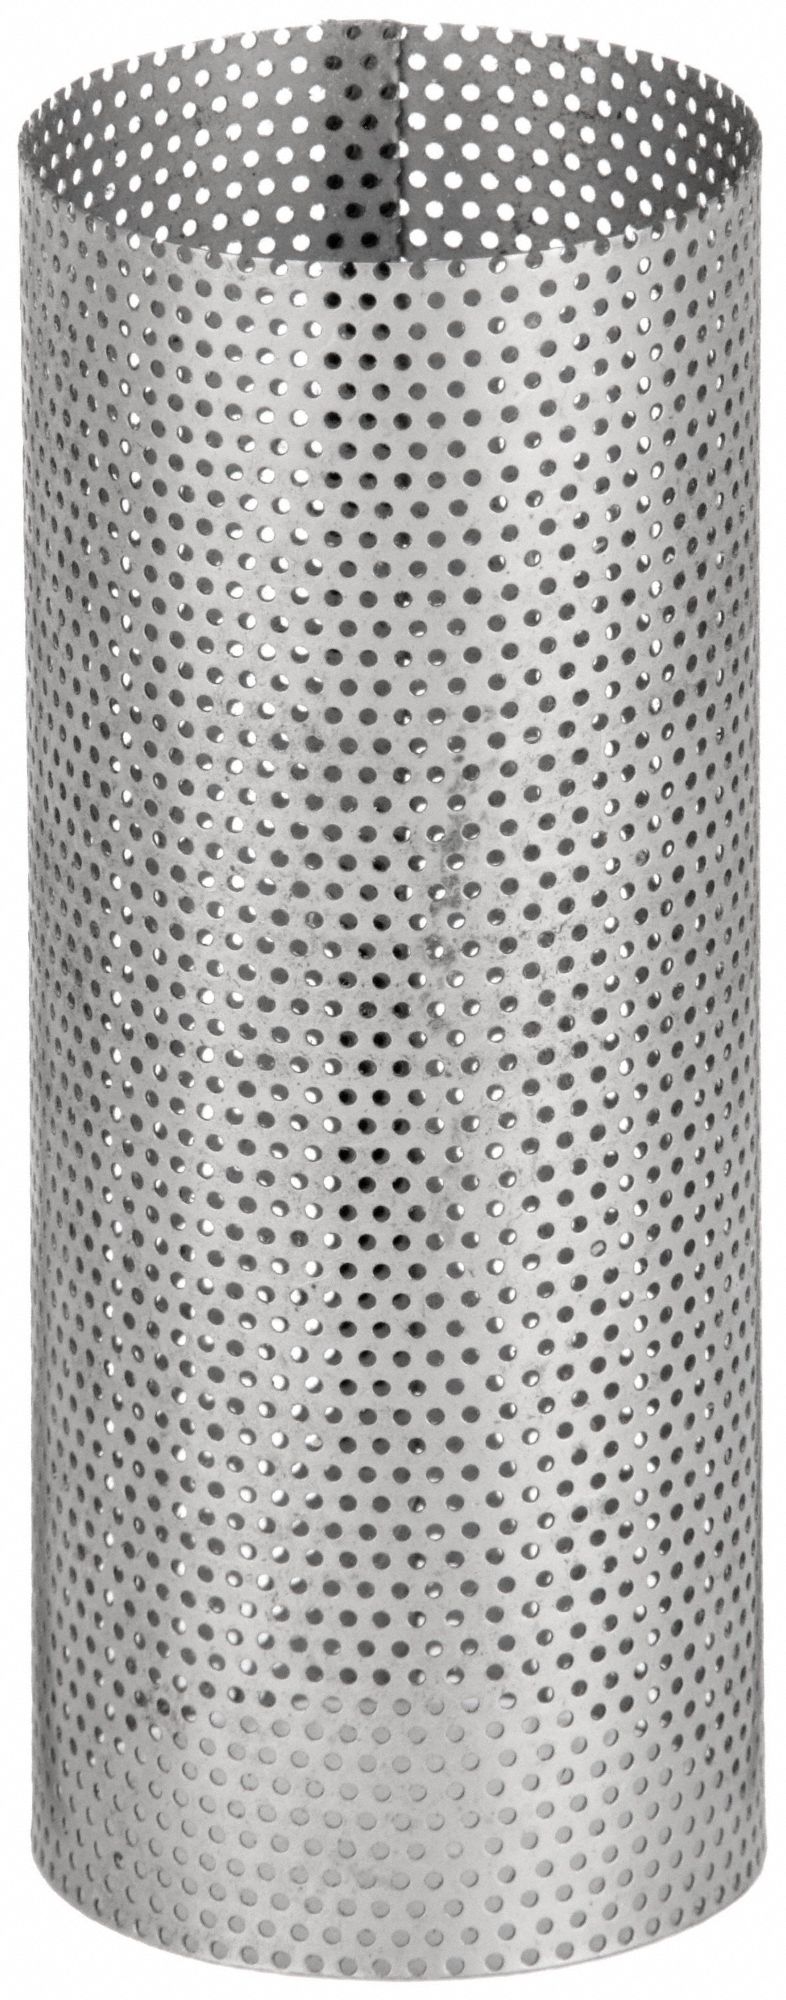 APPROVED VENDOR Strainer Screen: Perforated, 0.0625 in, 304 Stainless Steel  Screen Material